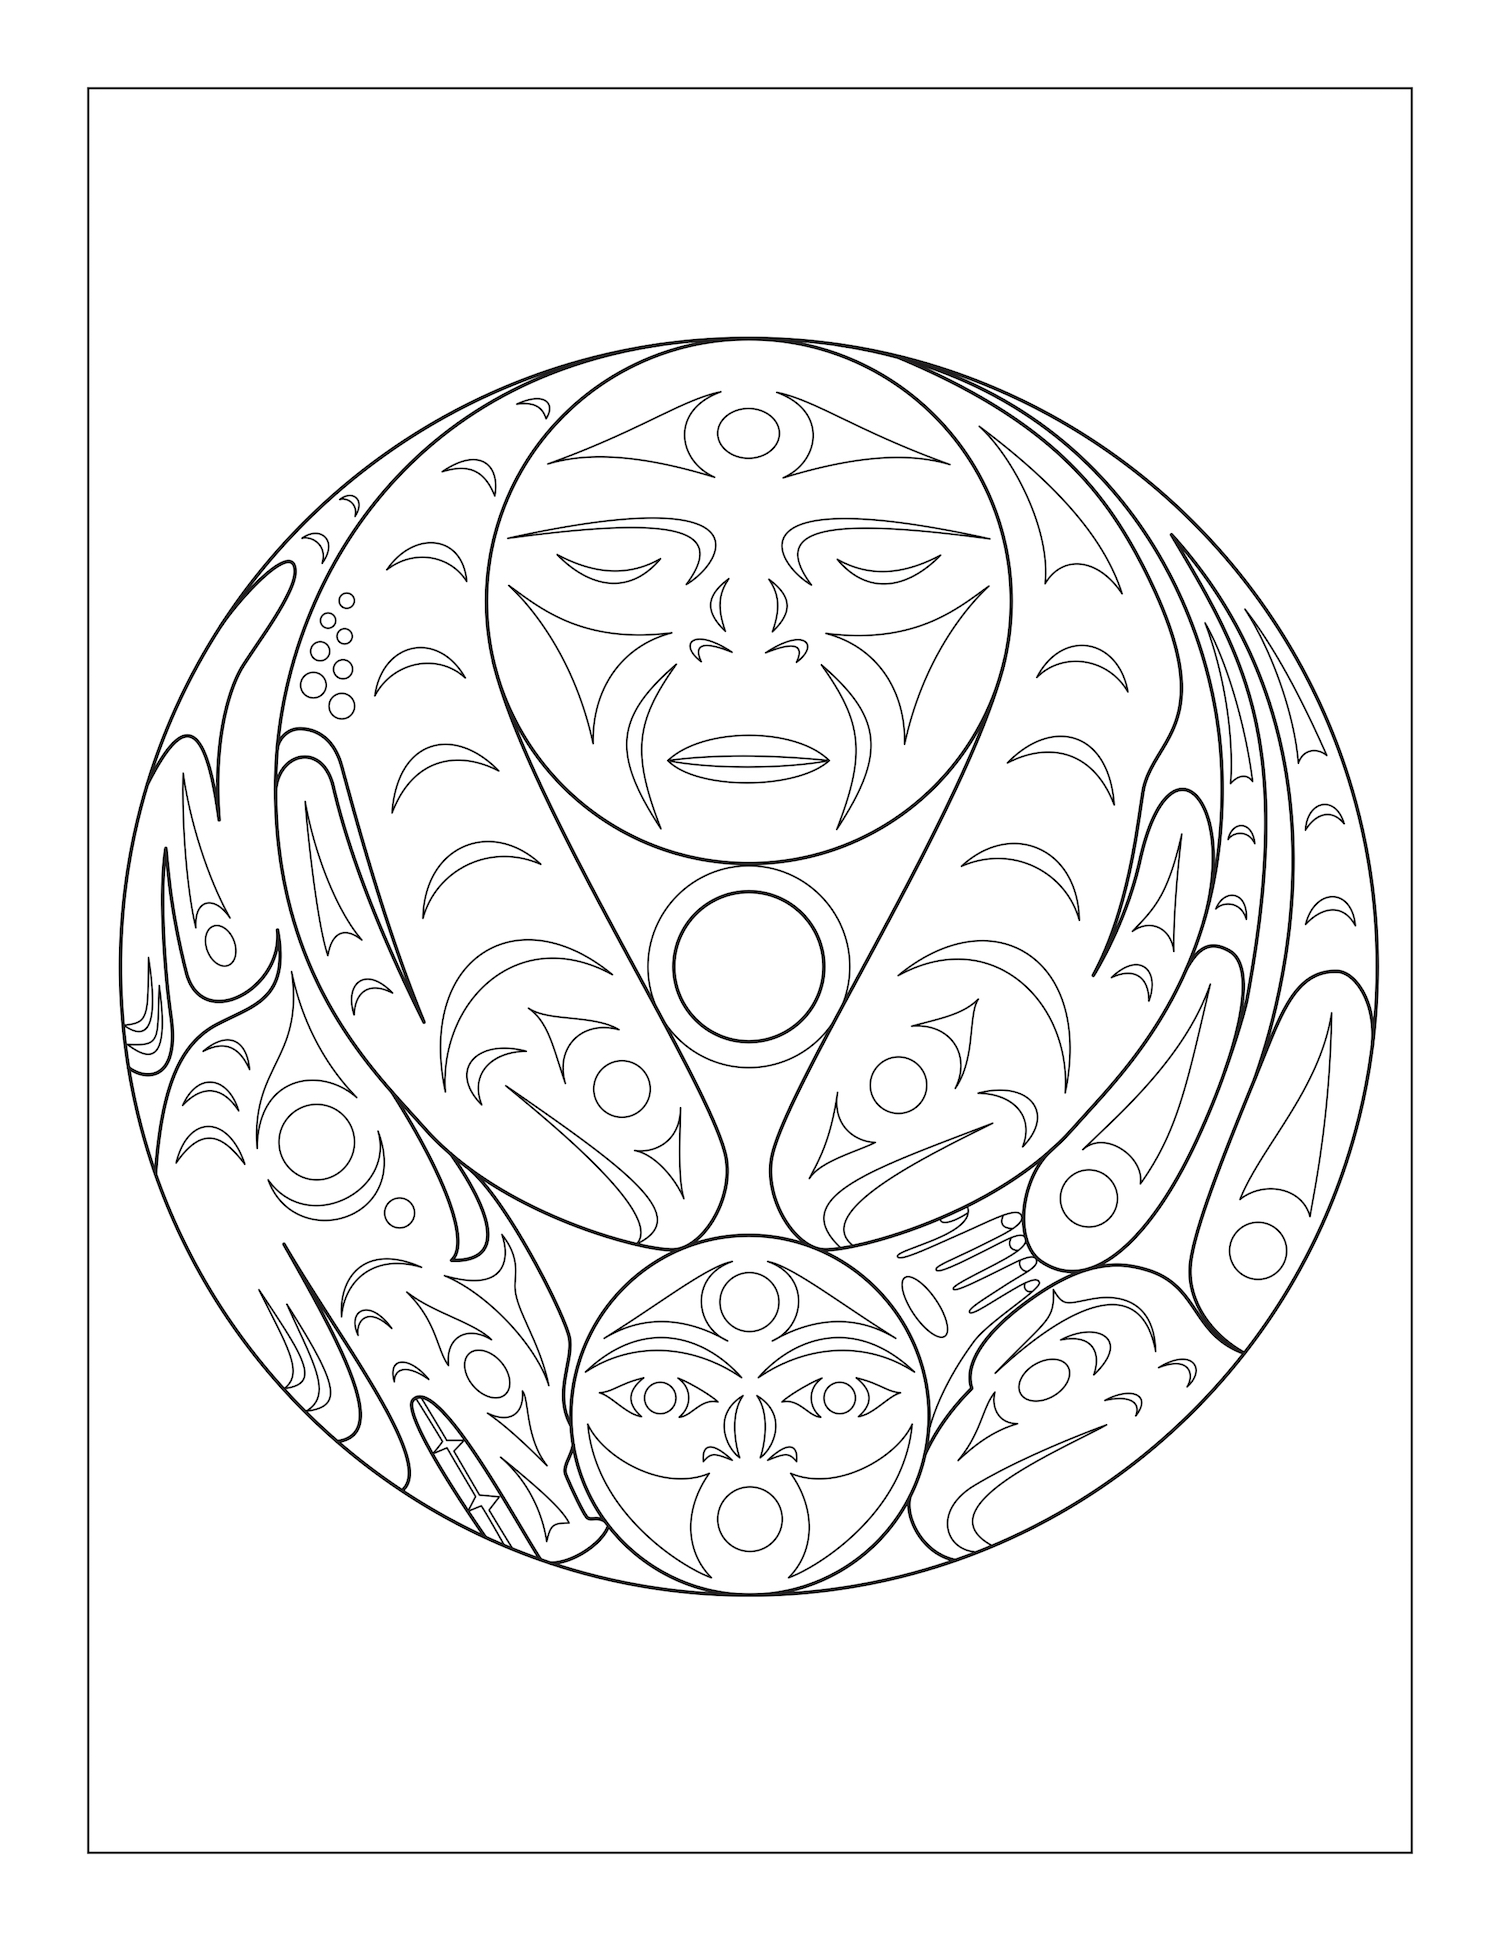 Salmon People Print Coloring Page